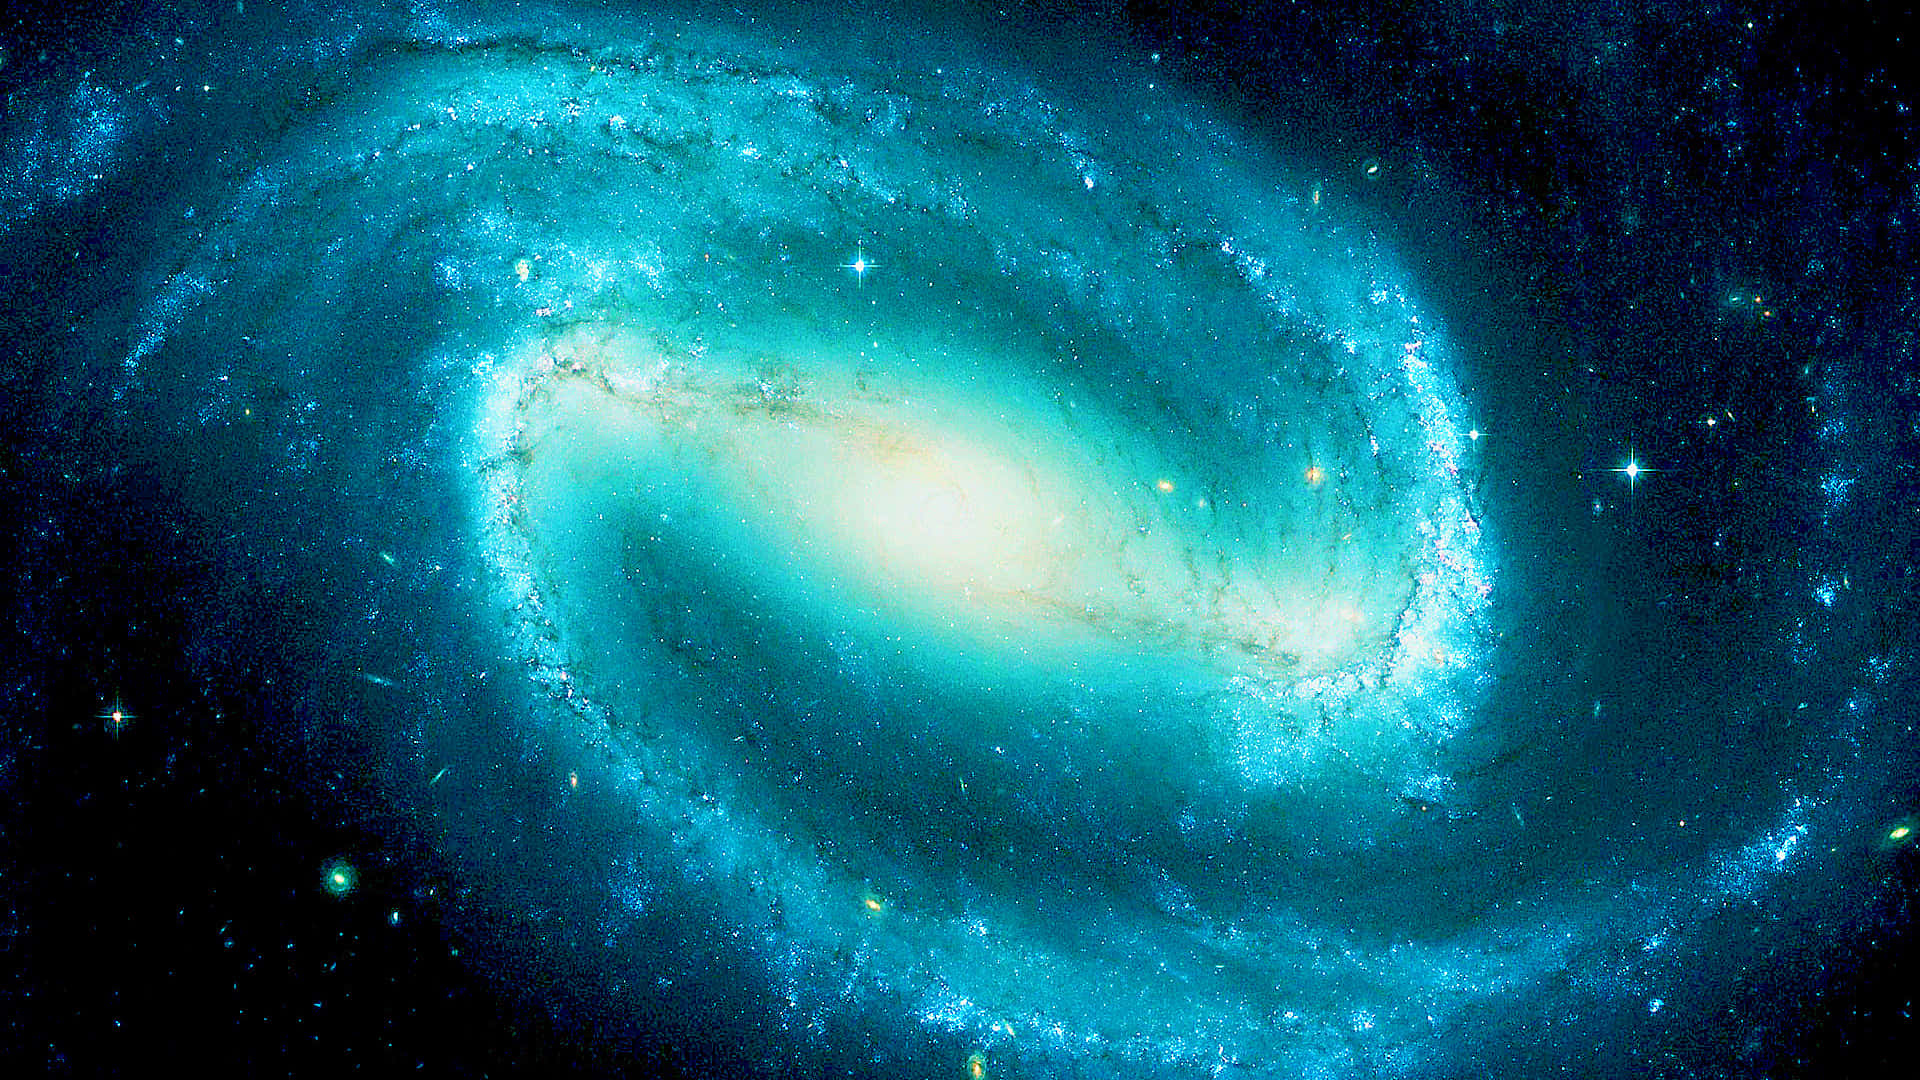 Explore the outer cosmos with Blue Galaxy